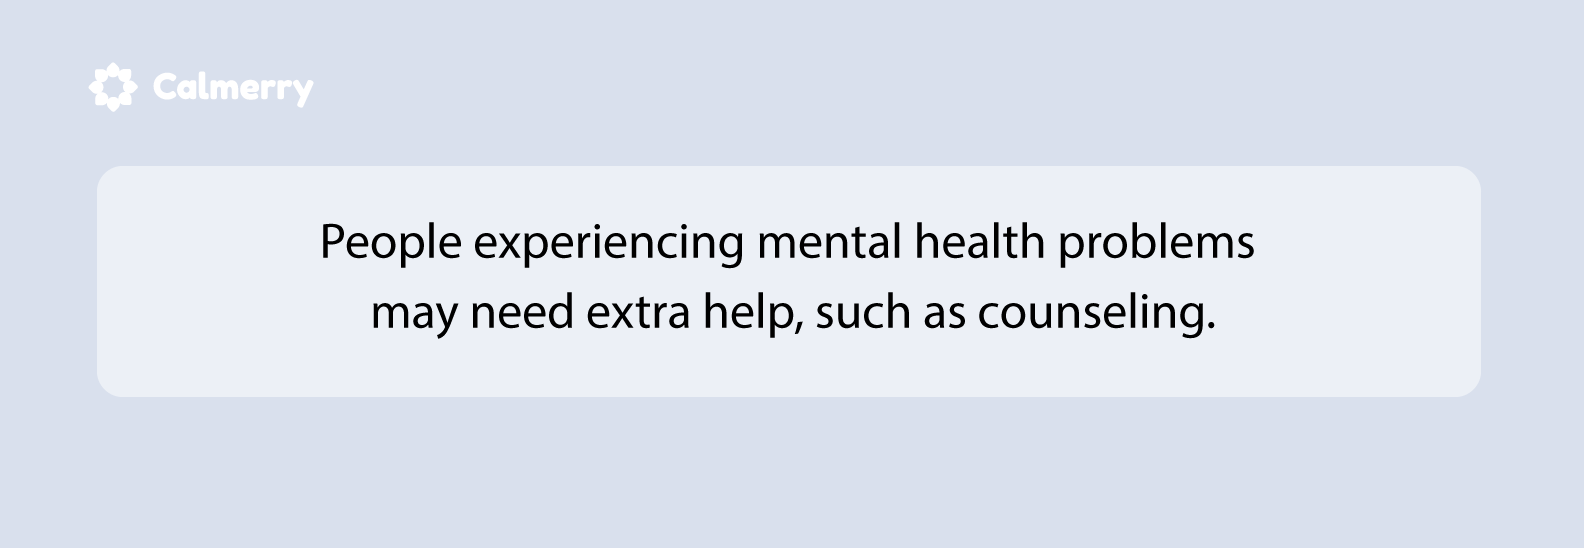 People experiencing mental health problems may need extra help